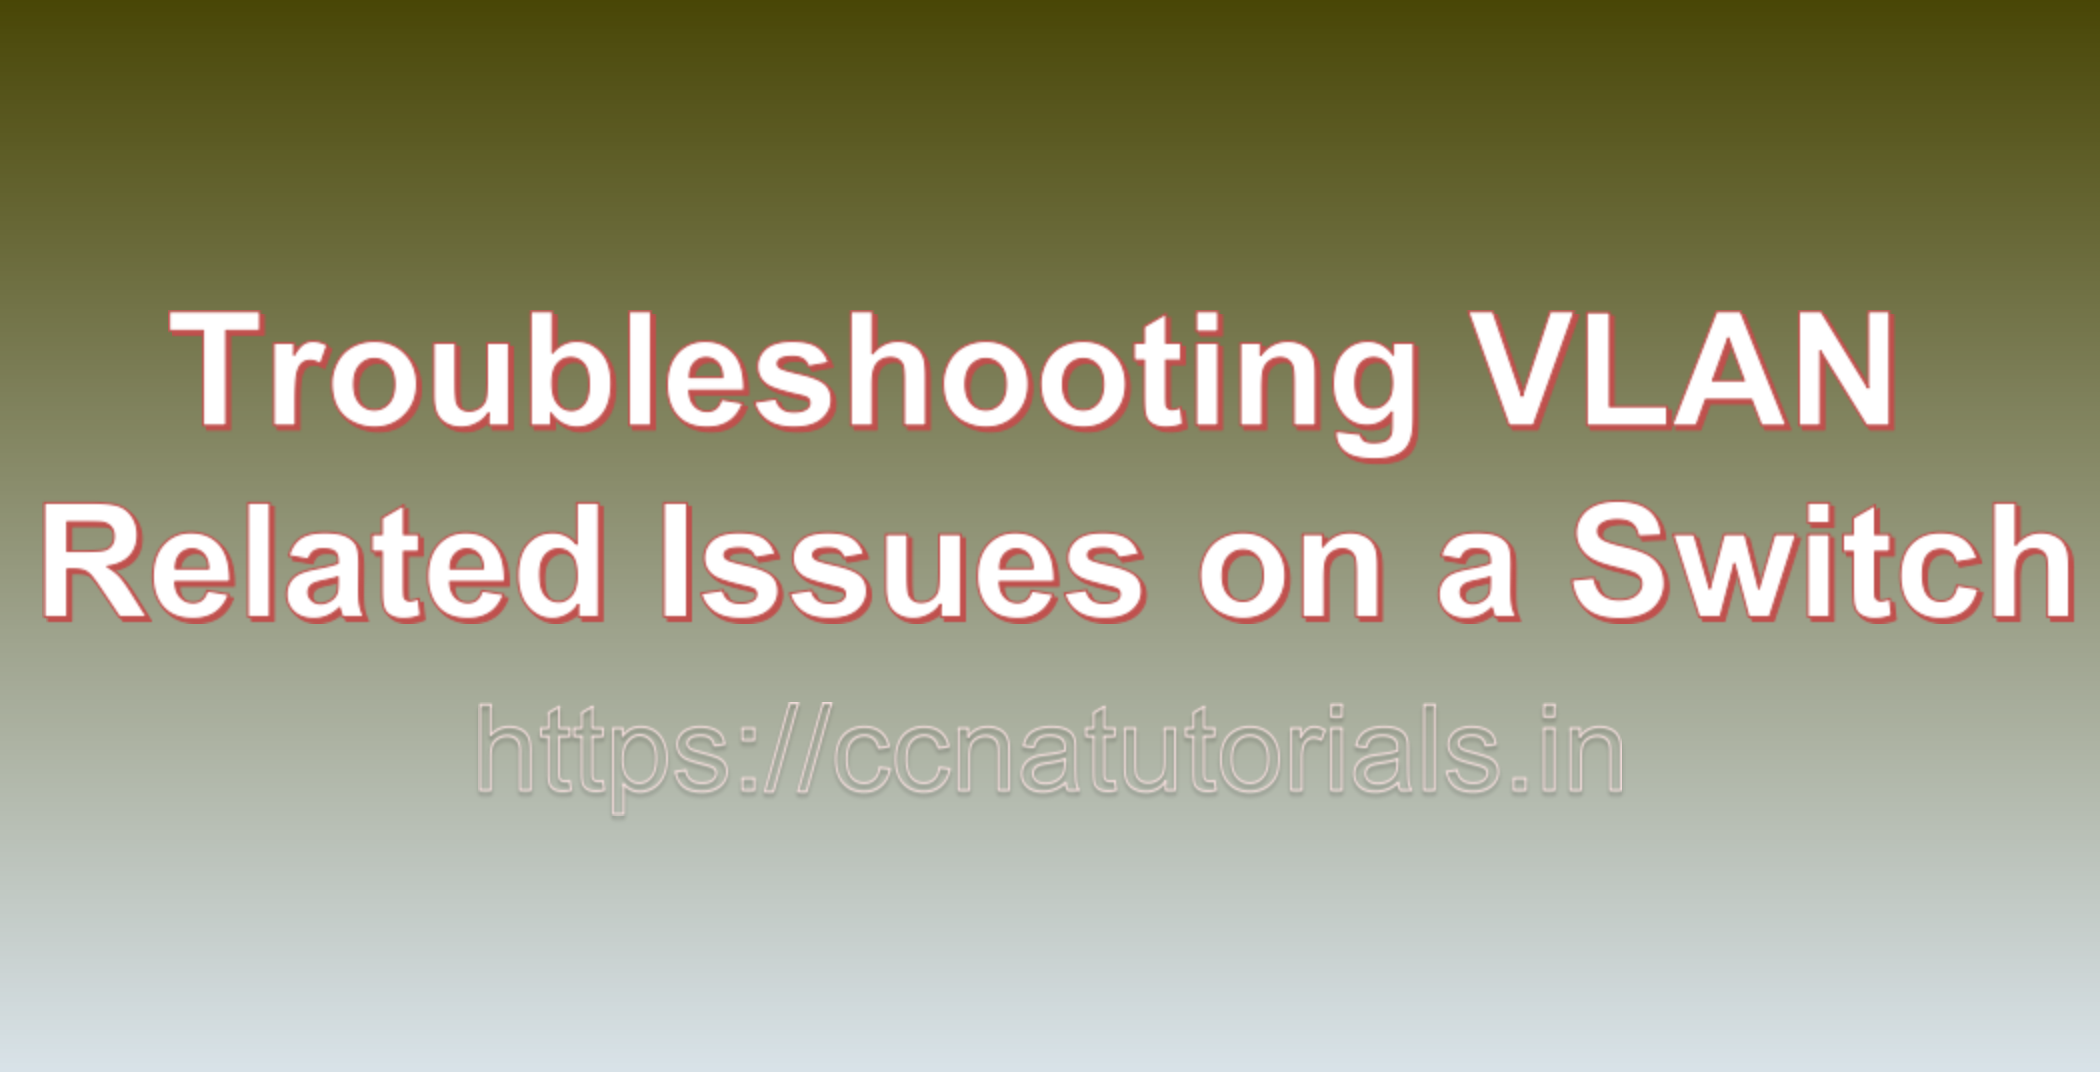 Troubleshooting VLAN Related Issues on a Switch, ccna, ccna tutorials